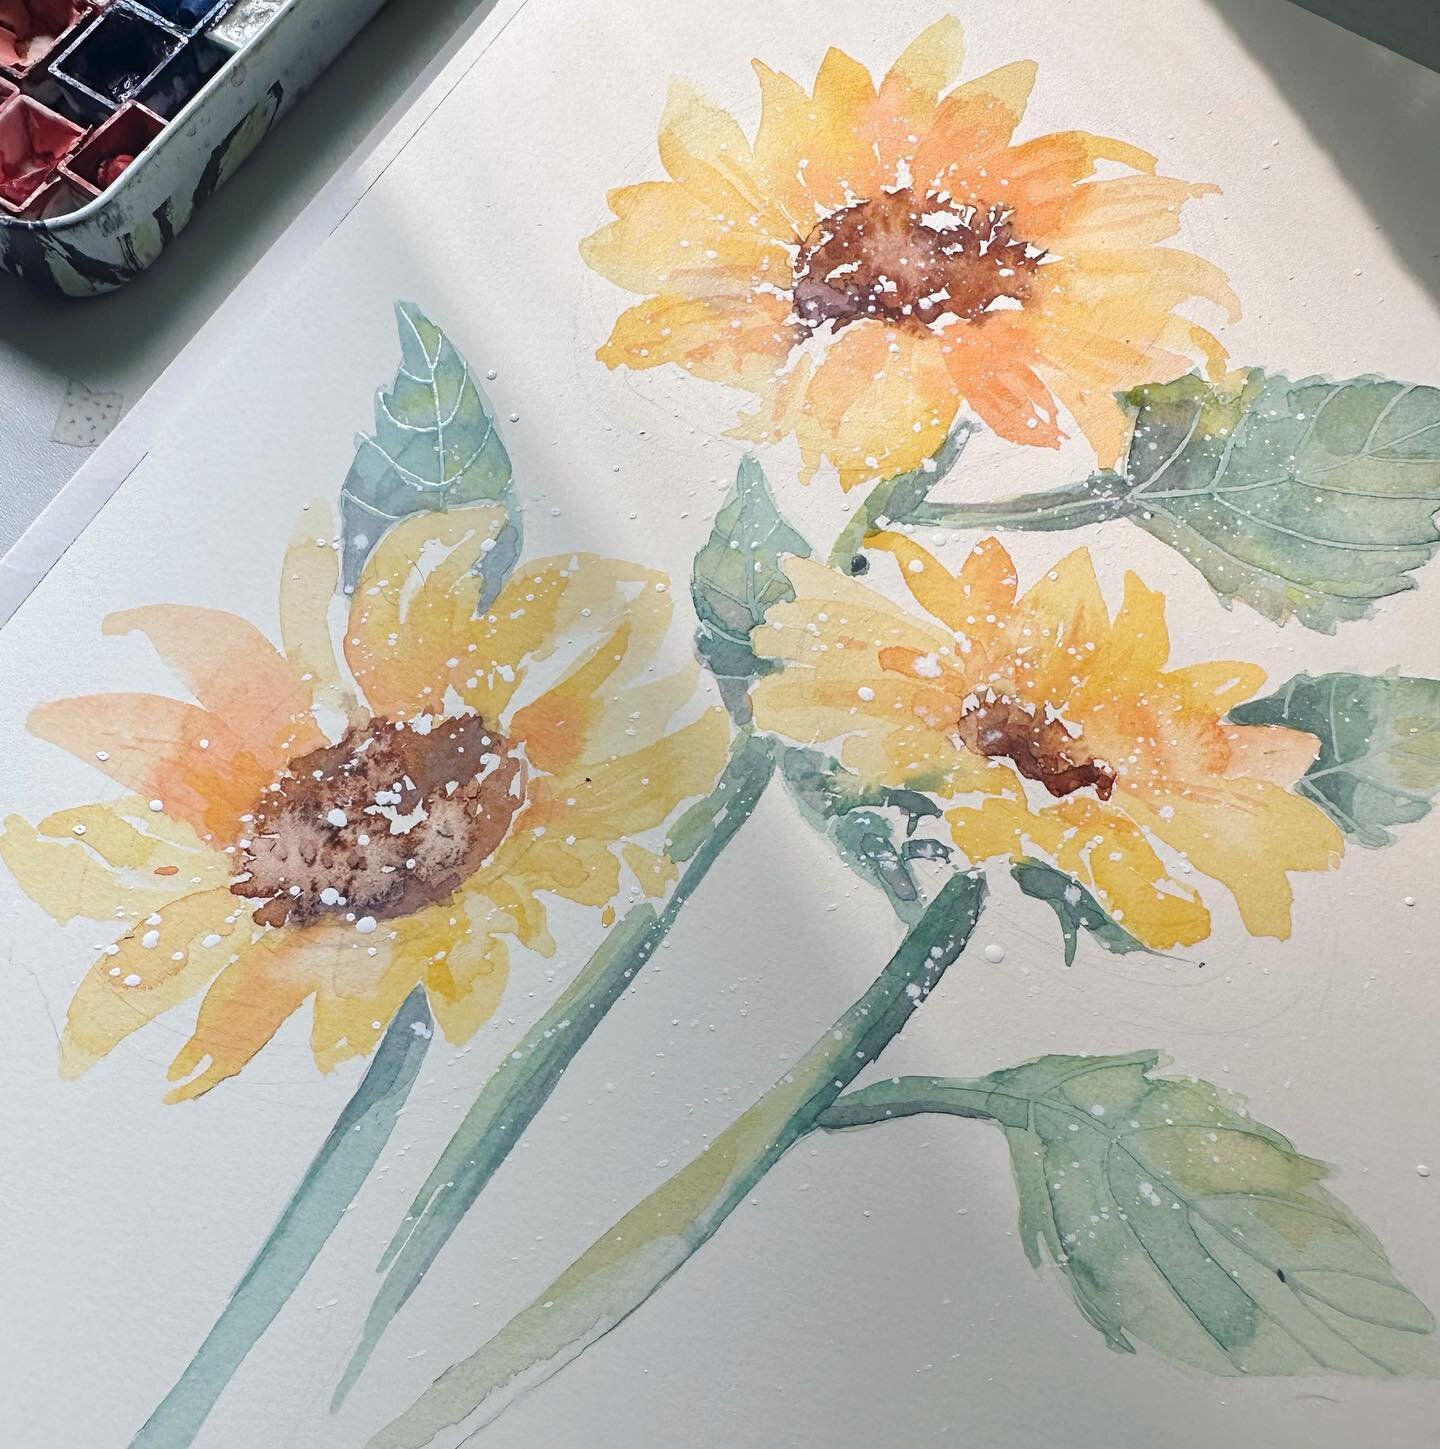 Something happy for your feed. Expressive colorful sunflowers that feel like sunshine. ☀️🌻